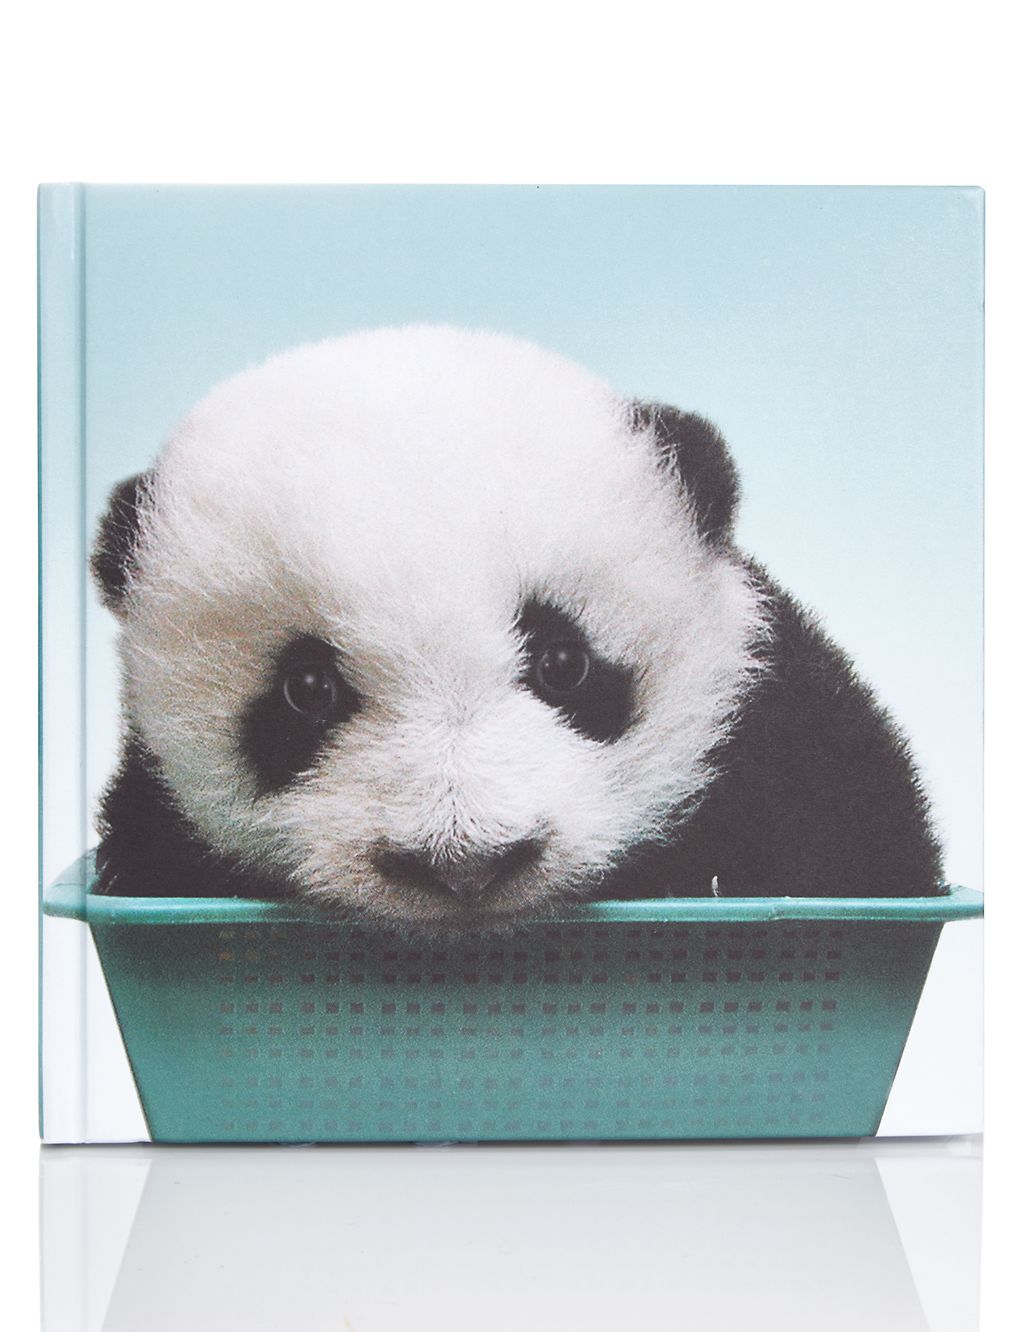 Baby Panda Address & Special Events Book 3 of 3